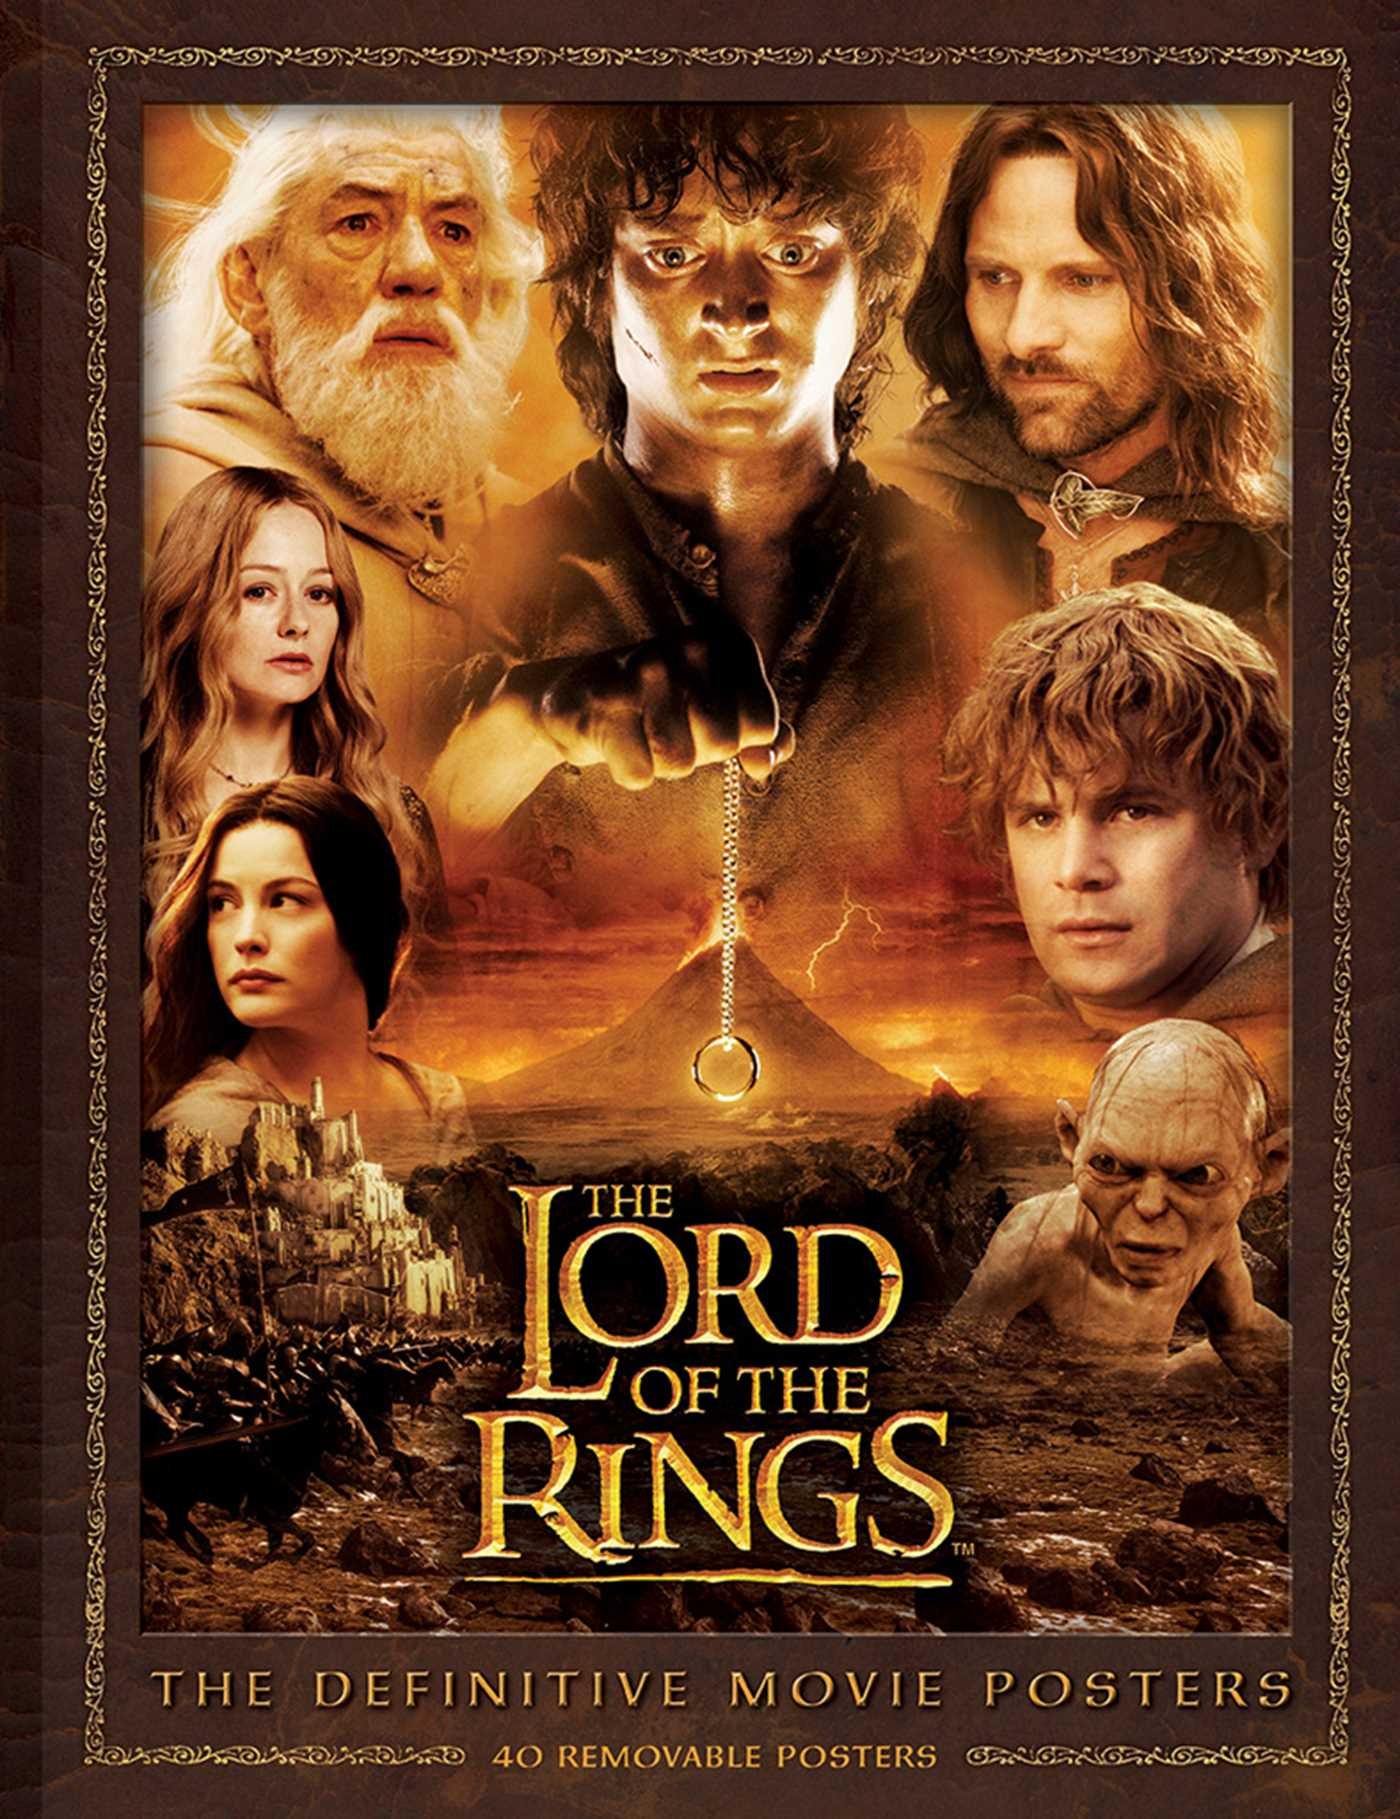 Amazon 'Lord of the Rings' Series 'Rings of Power': Trailer, Release Date,  Cast